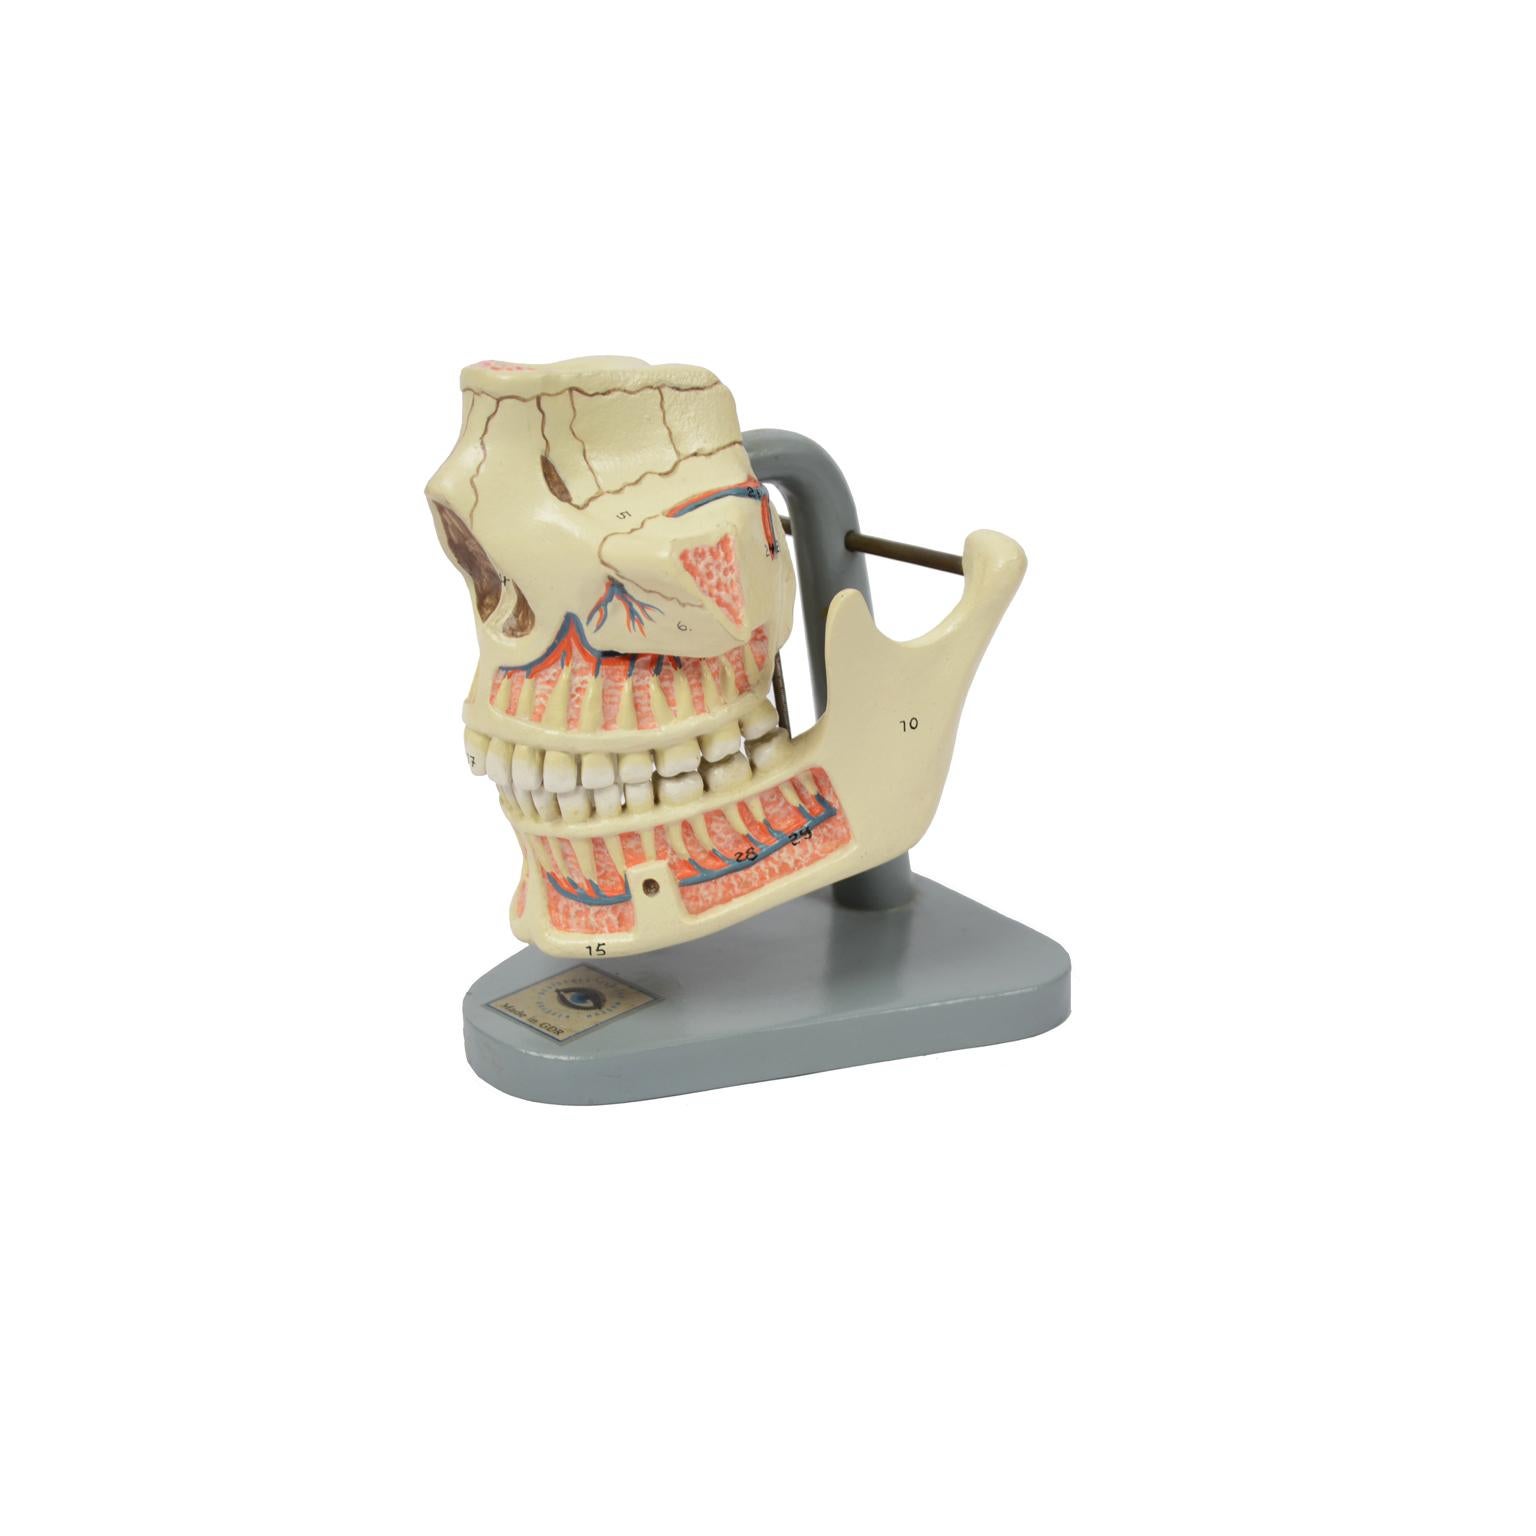 Mid-20th Century Didactic Anatomic Model of Mandible and Jaw Made in the 1950s